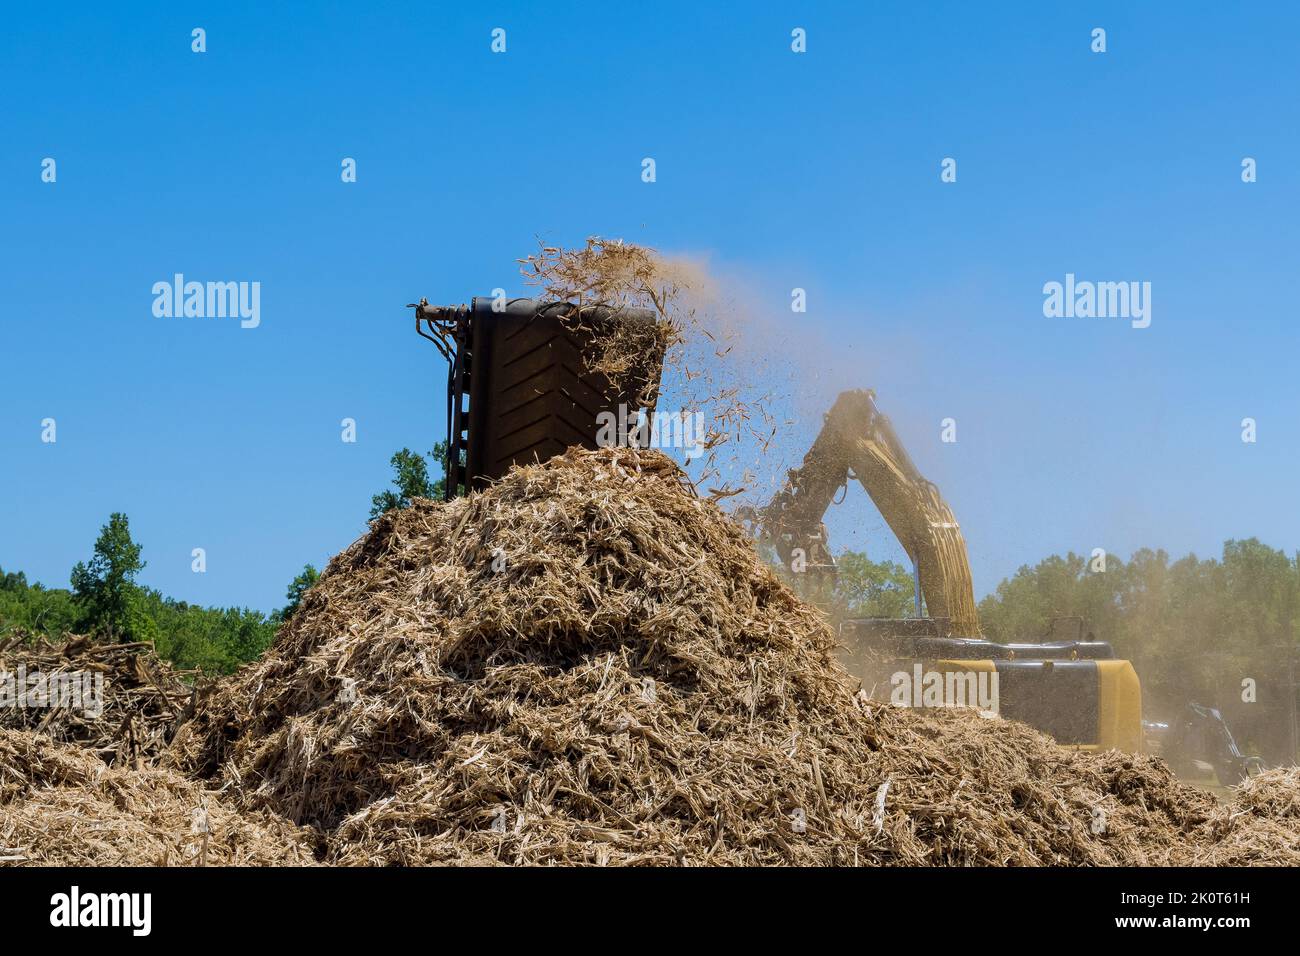 As part of the preparation for a housing development, a shredder machine is used to shred the roots of the trees into chips with an industrial Stock Photo